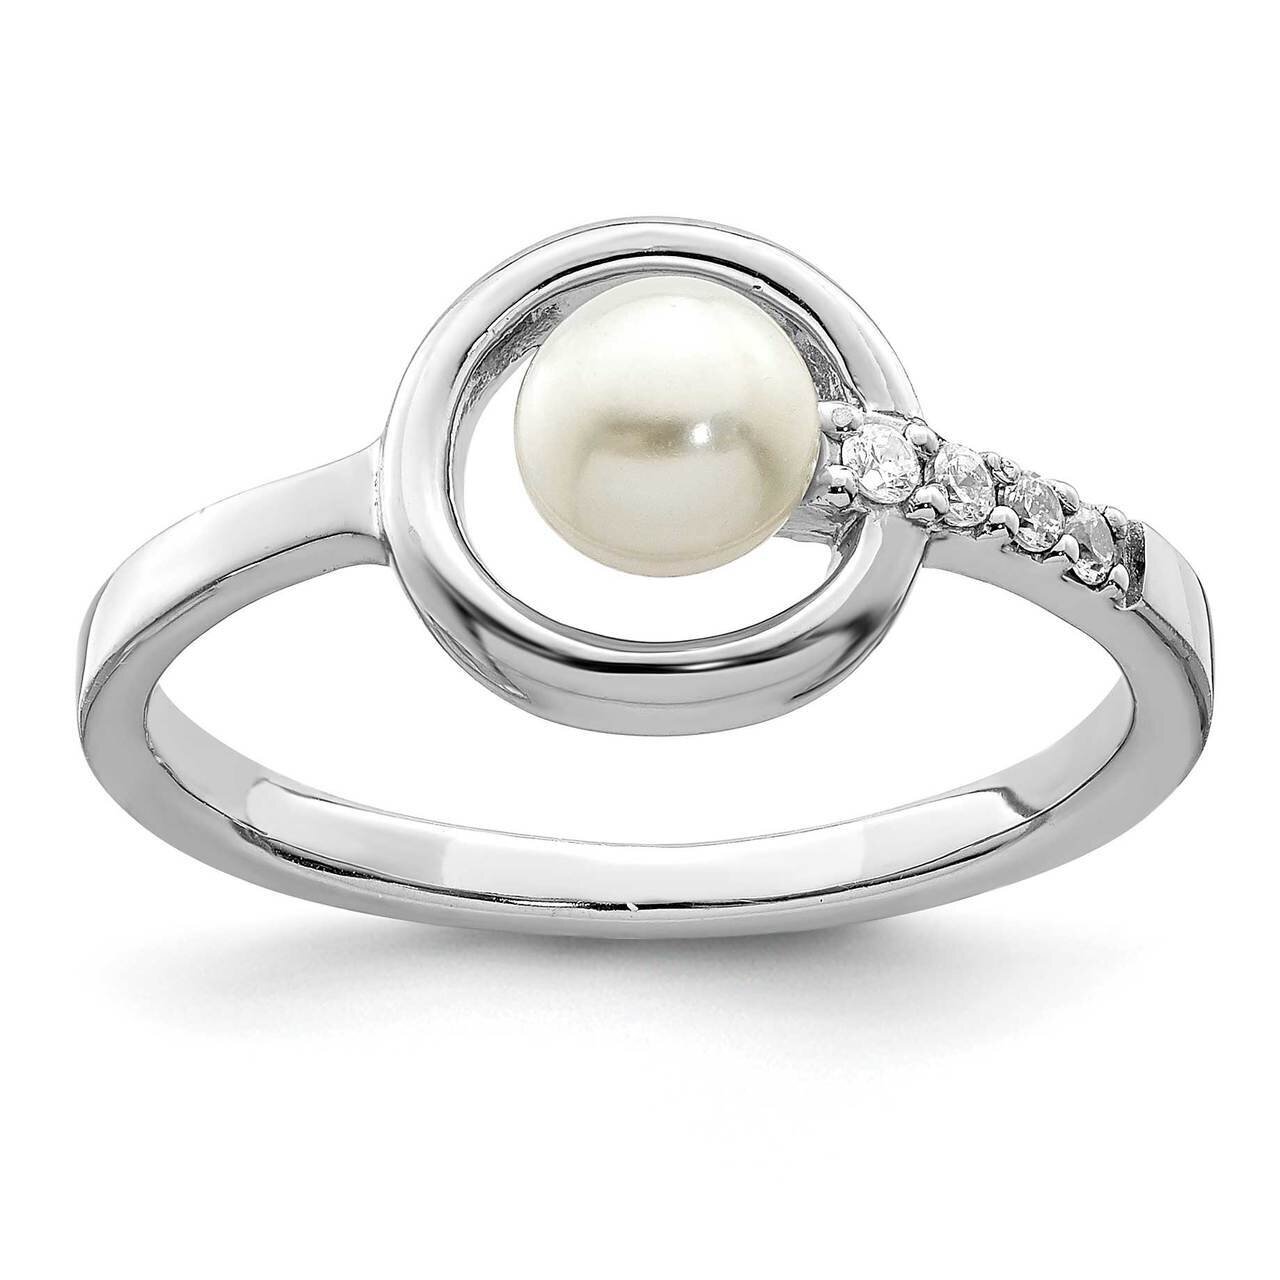 5-6mm Button Freshwater Cultured Pearl in Circle Ring Sterling Silver Rhodium-plated CZ Diamond QR6874